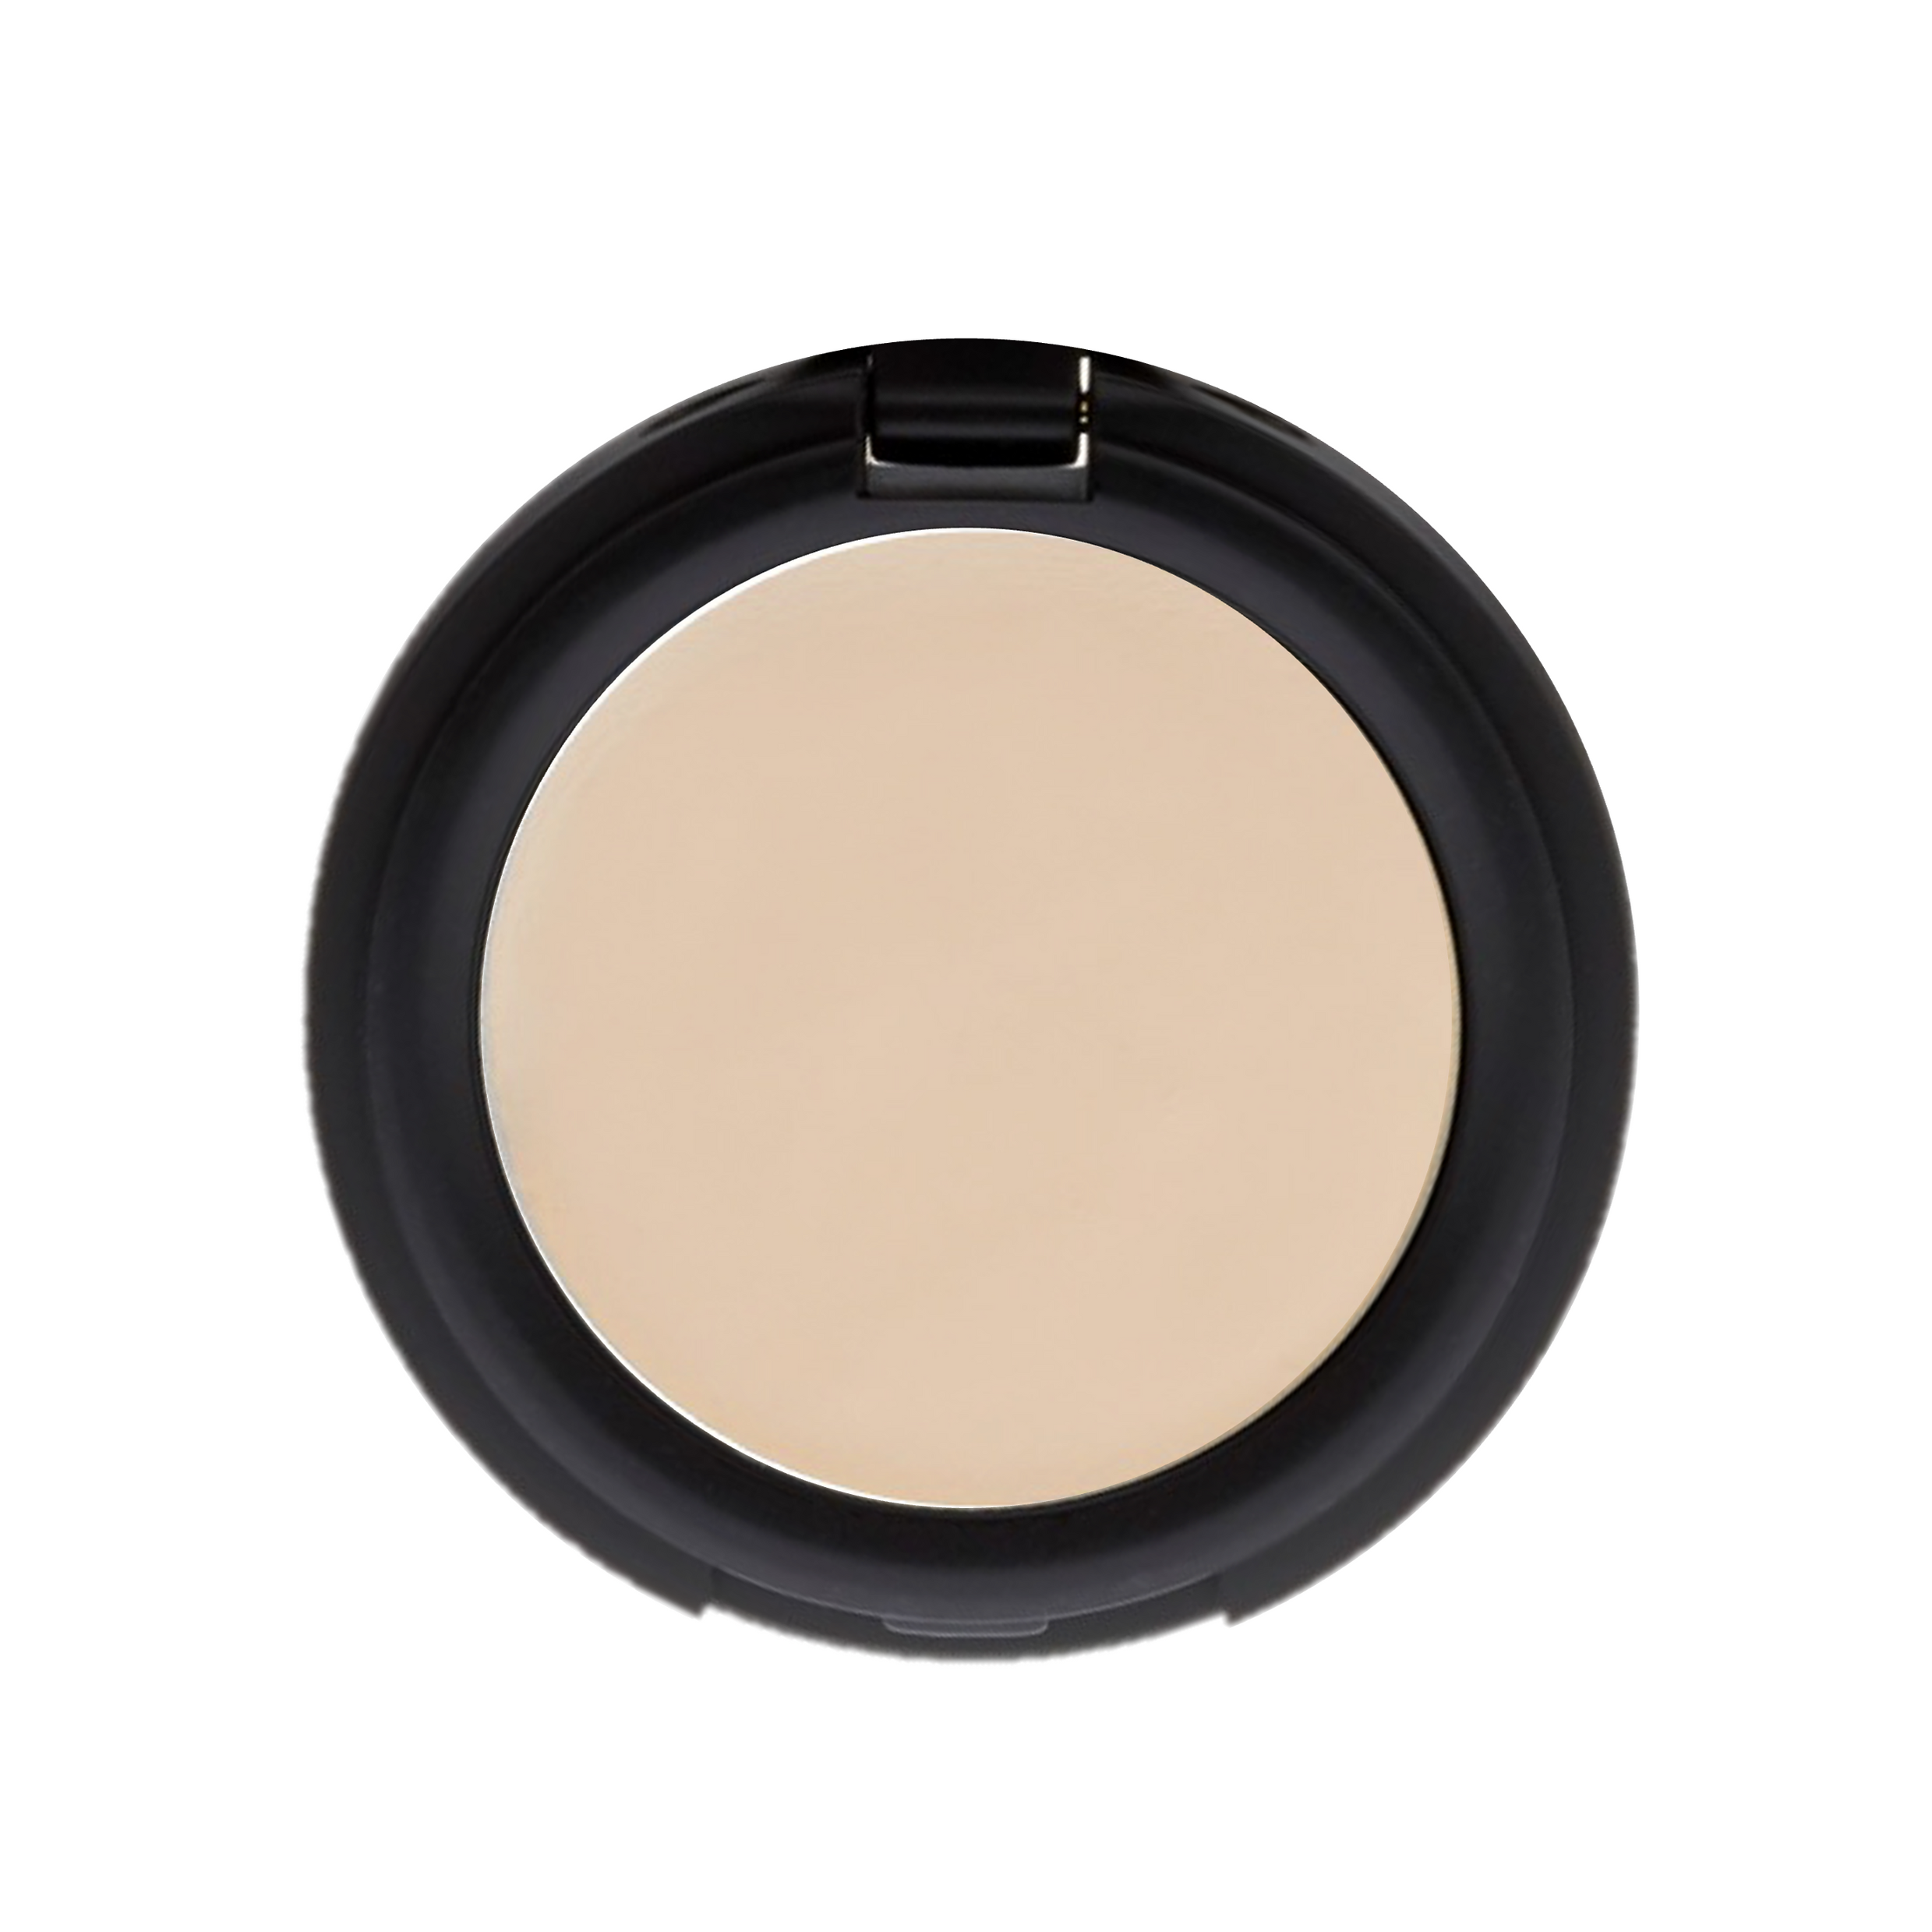 Adaptive Concealing Cream: Dewy, Medium to Full Coverage - Without Mica, & More!